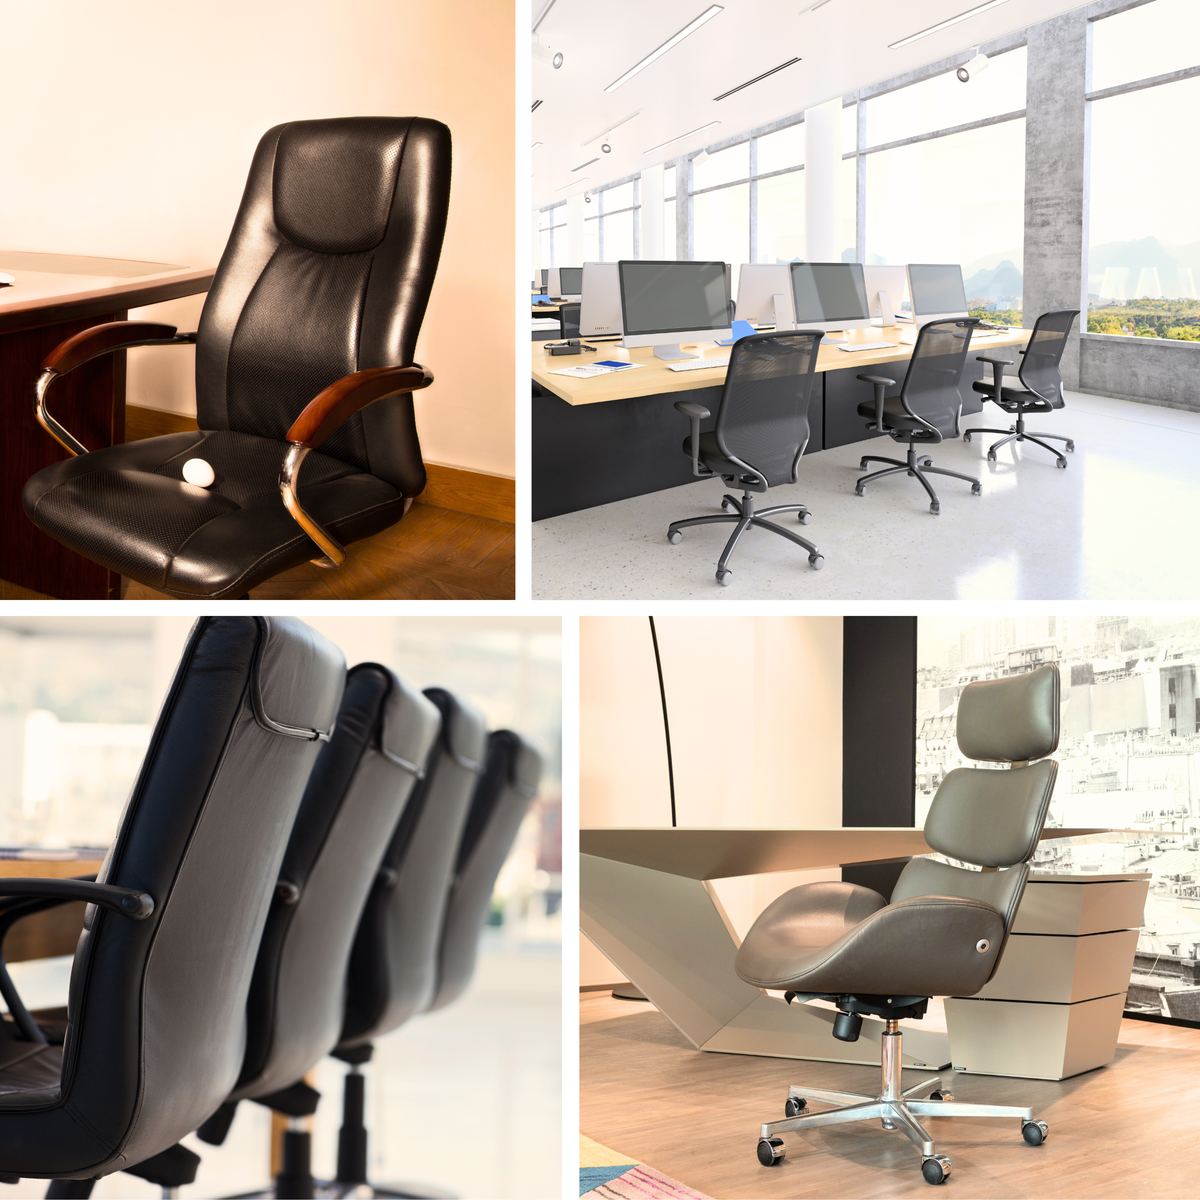 Four different ergonomic office chairs